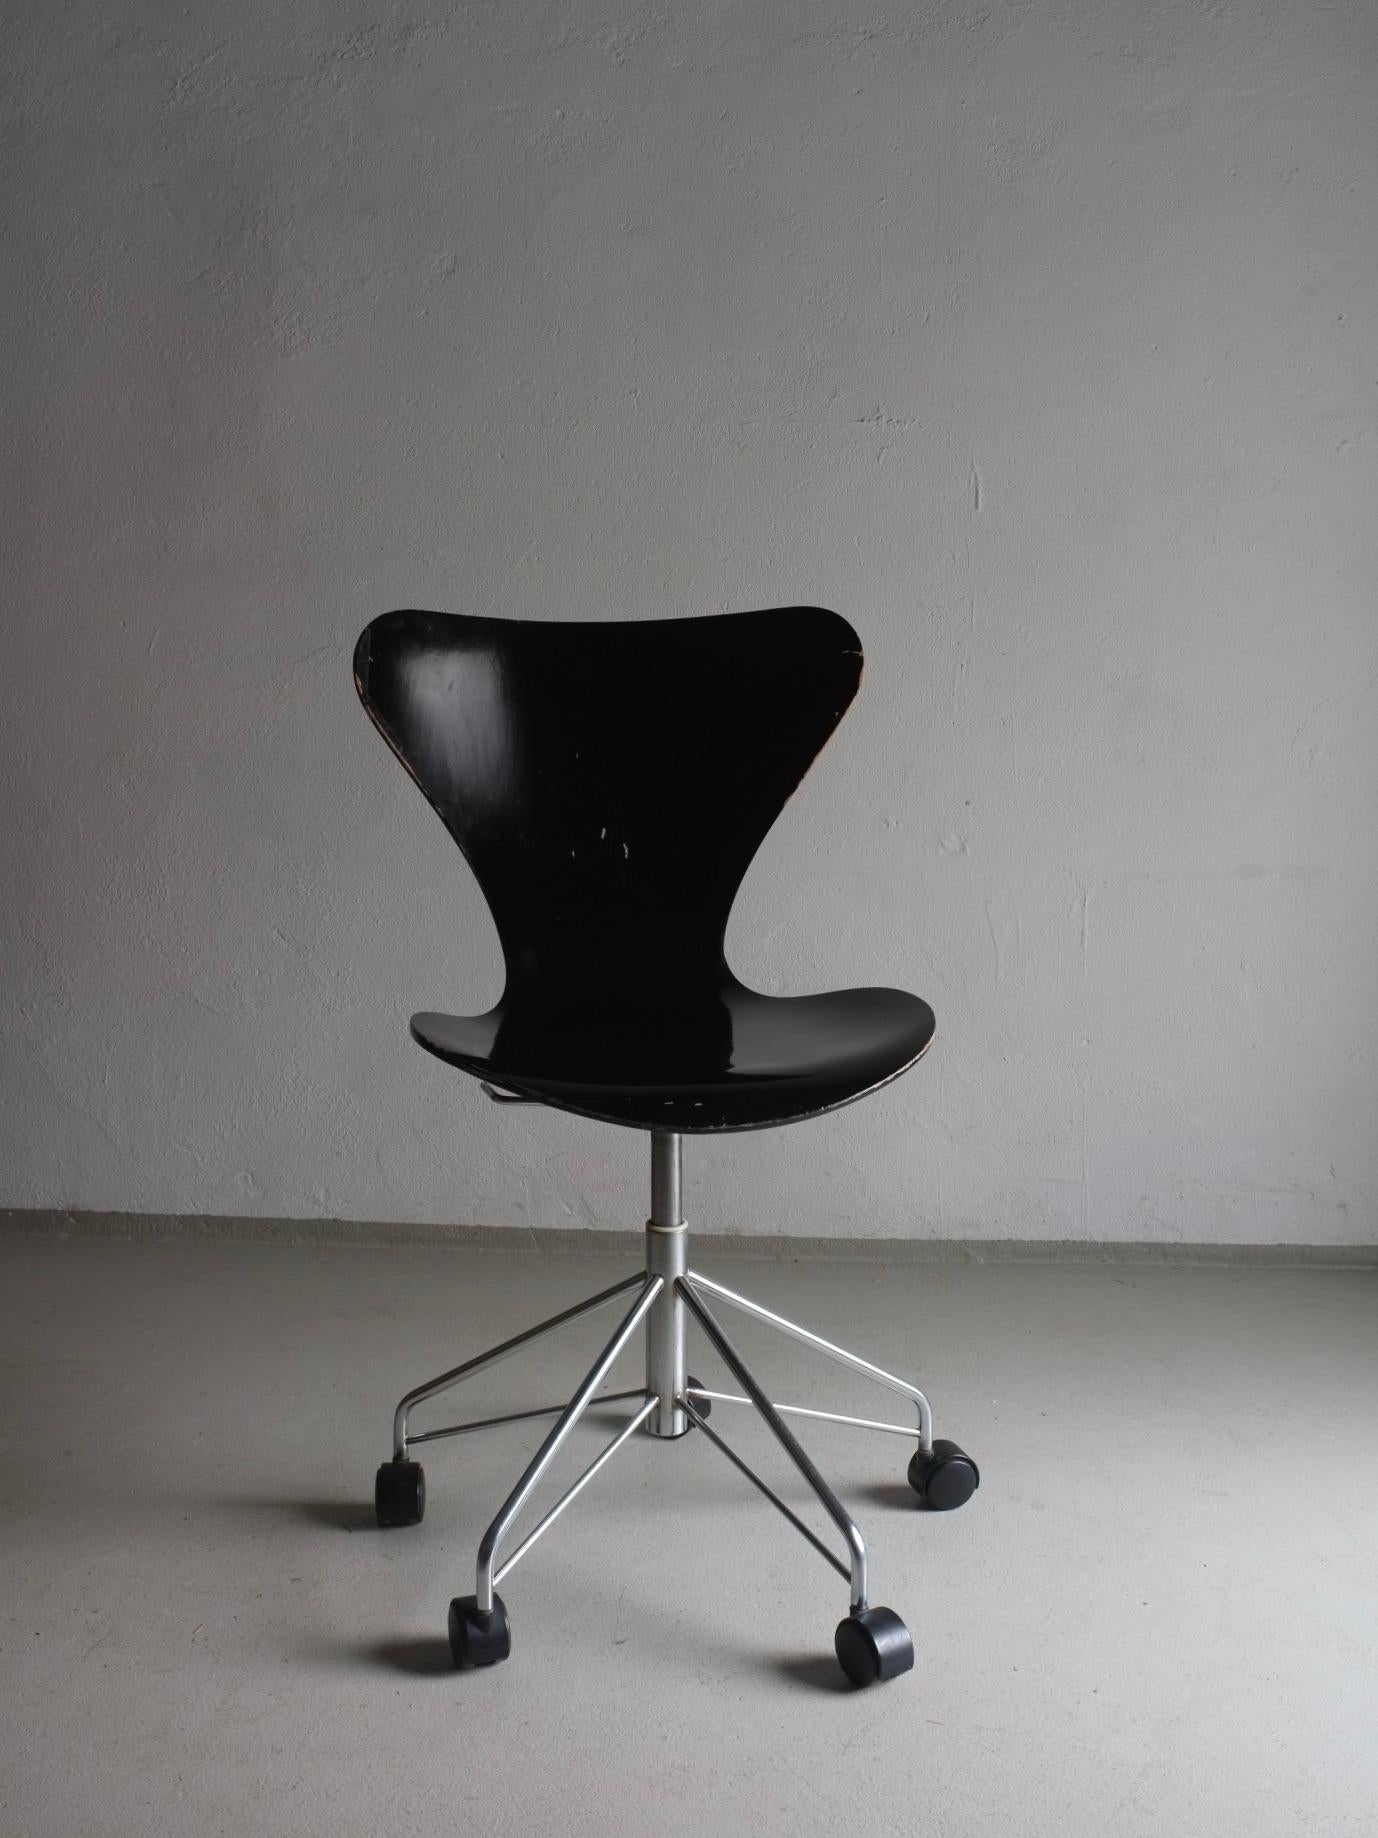 Vintage black swivel desk chair with adjustable seat, model 3117 designed by Arne Jacobsen for Fritz Hansen in the 1950s. Some chairs have stickers confirming the production period. 3 chairs are available. 
Dimensions - H(max/min) 85.5/51 cm,